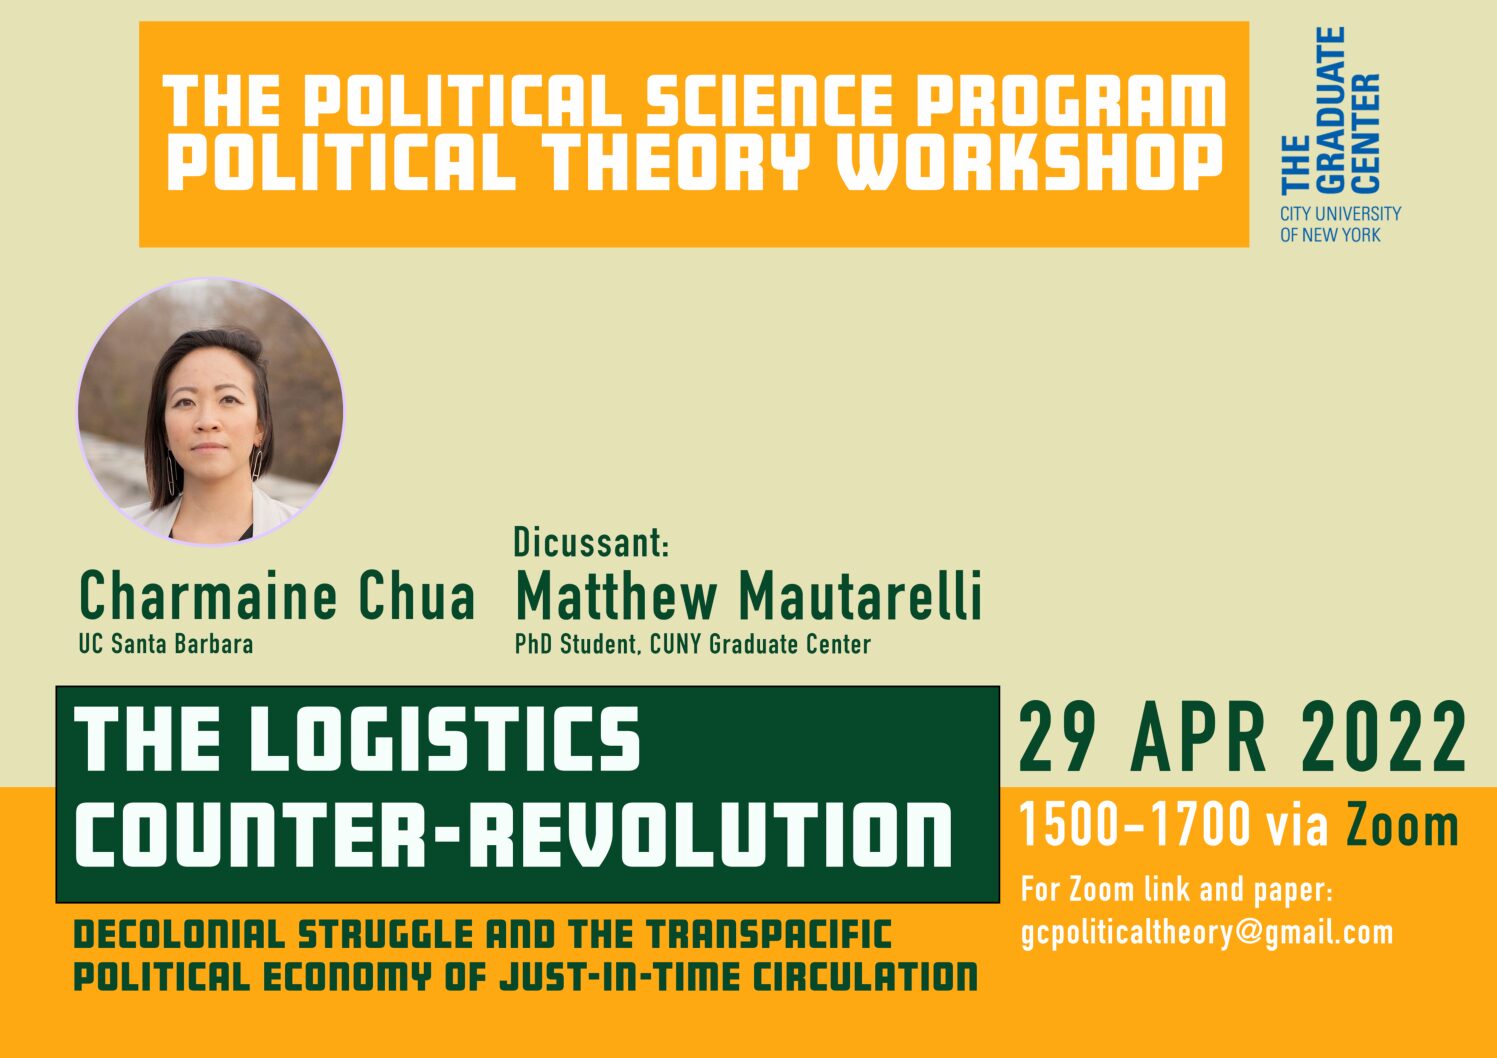 Political Theory Workshop: Charmaine Chua, "The Logistics Counterrevolution: Decolonial Struggle and the Transpacific Political Economy of Just-in-Time Circulation," Friday, April 29, 3-5pm